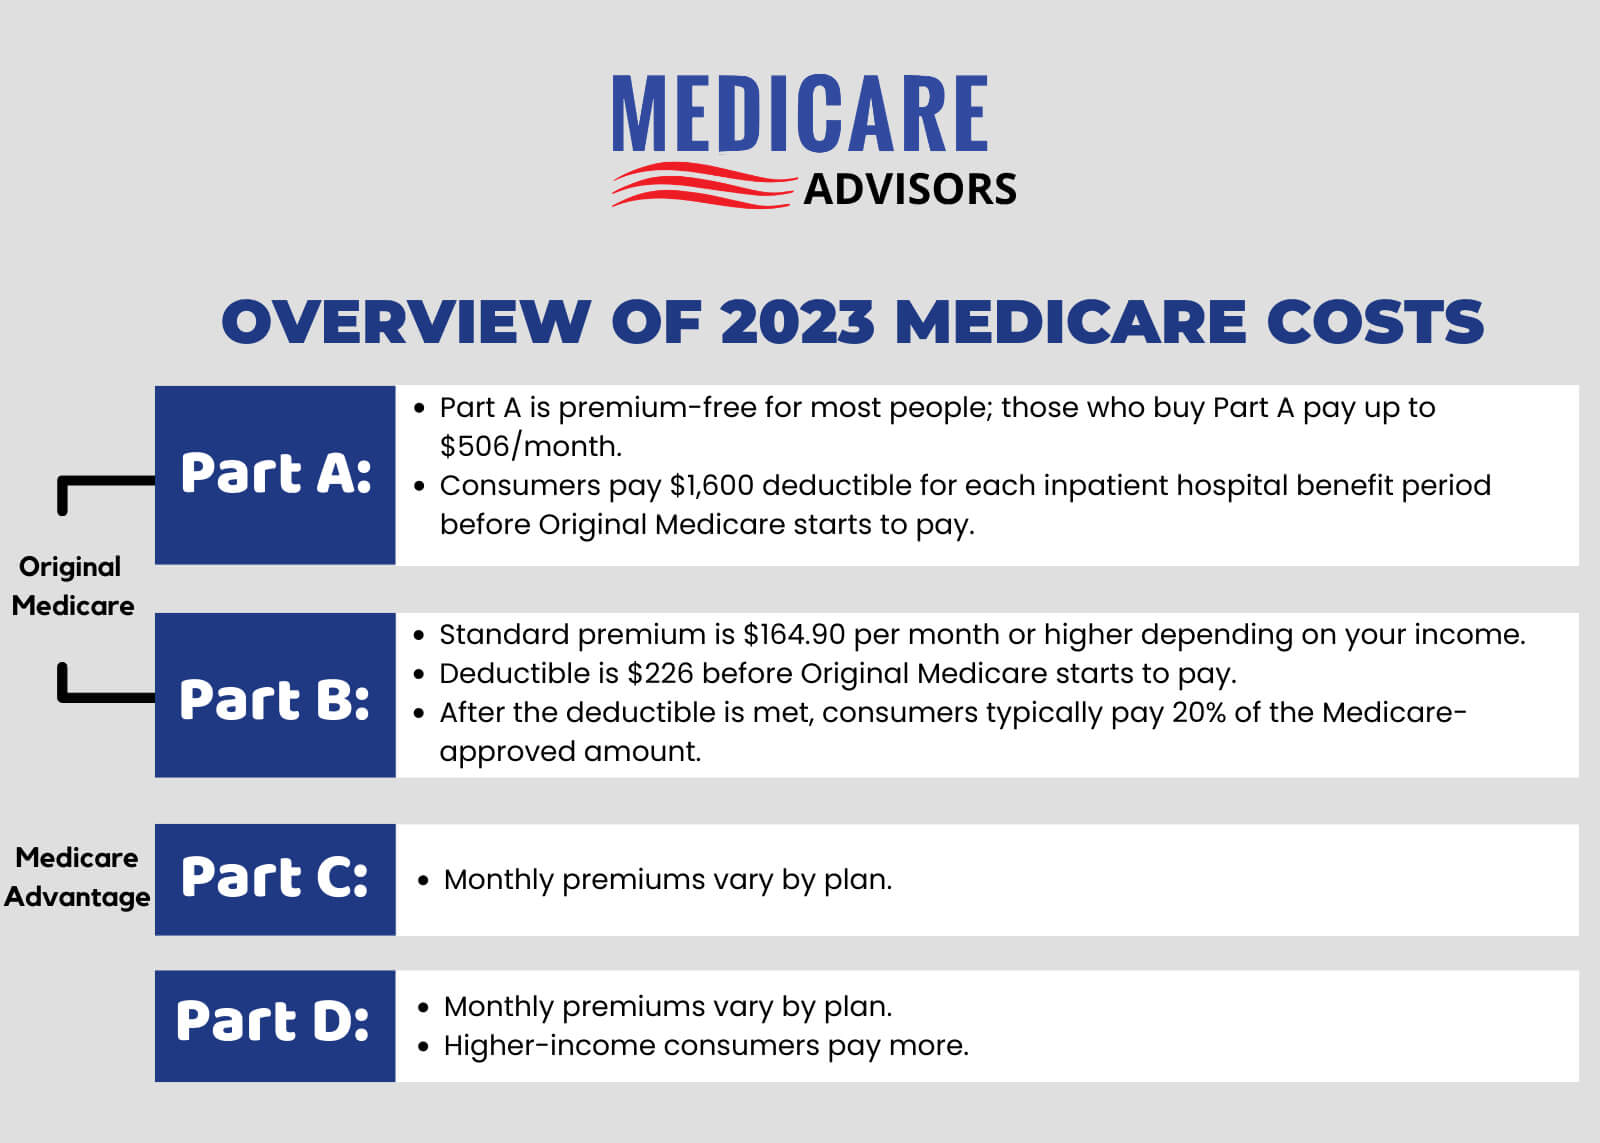 What Are the Costs Associated with Medicare Part C Coverage